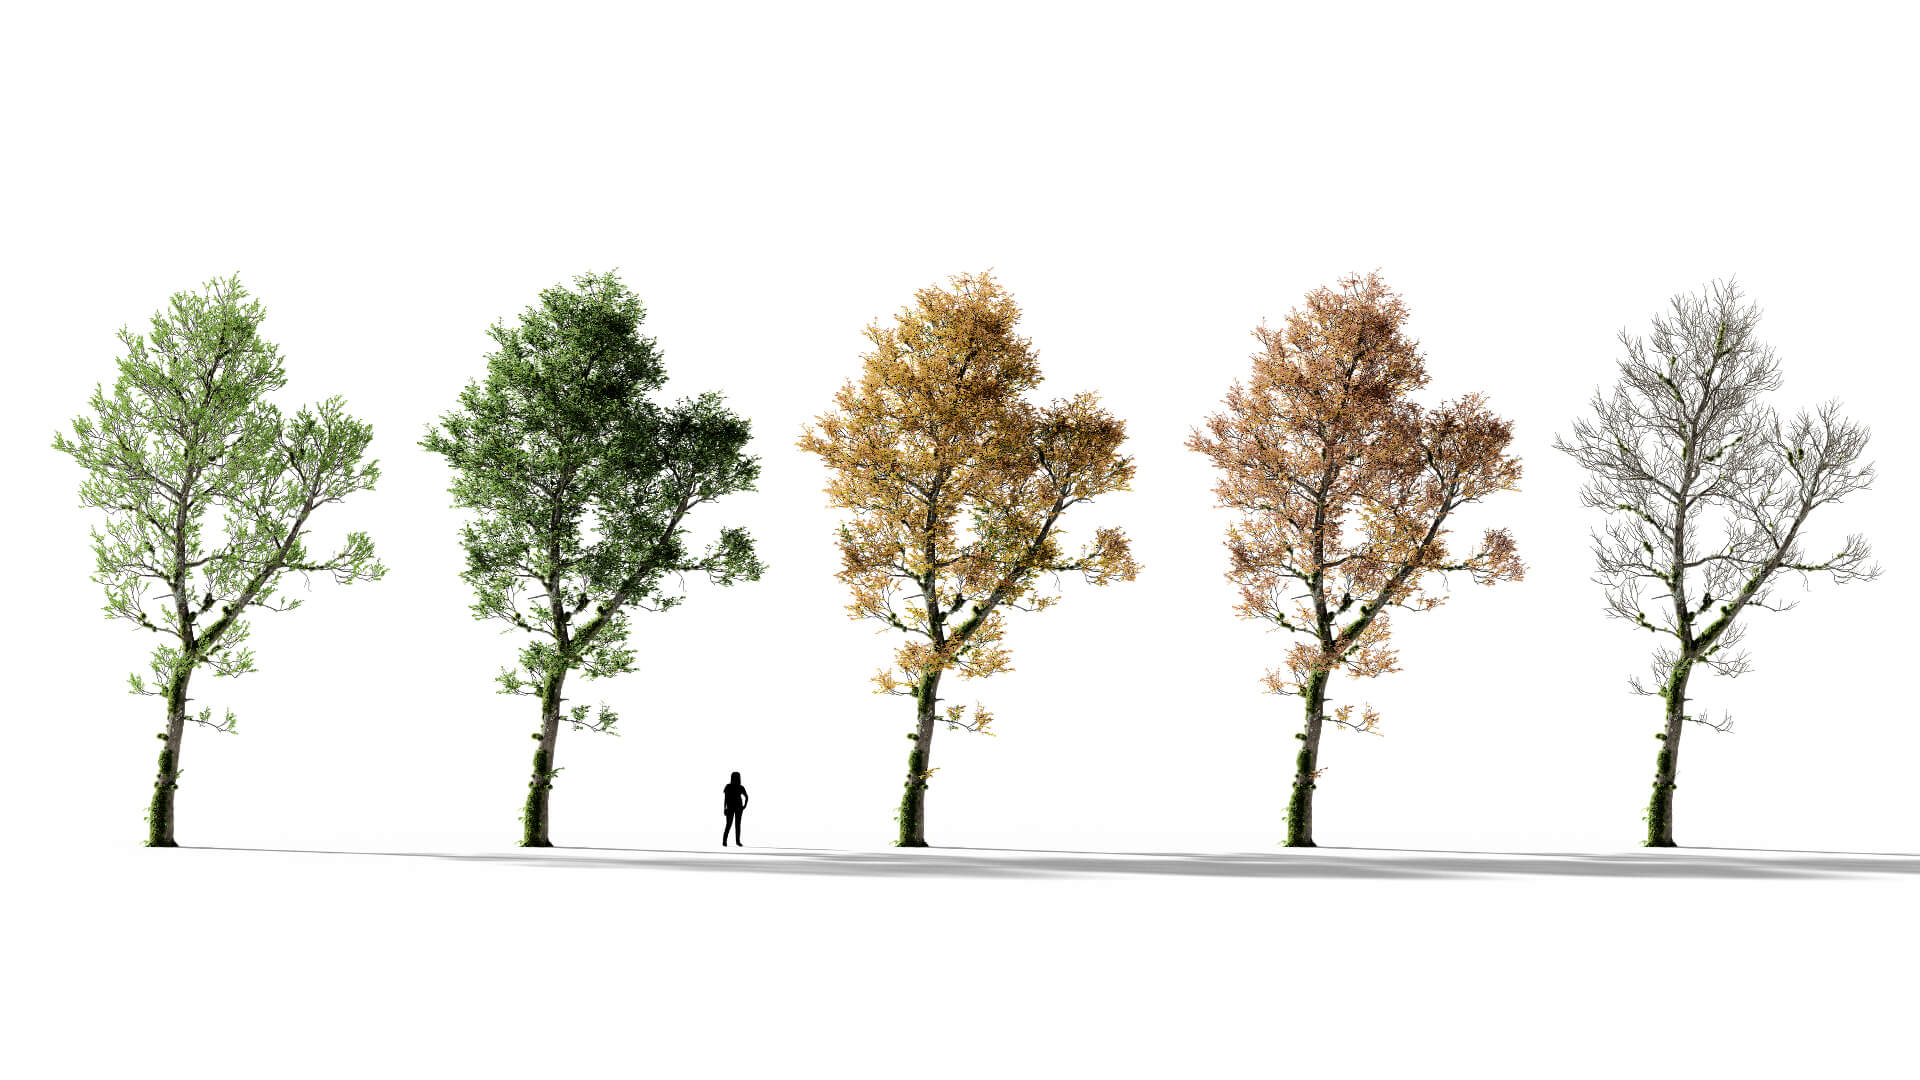 3D model of the English oak forest colonised Quercus robur forest colonised season variations